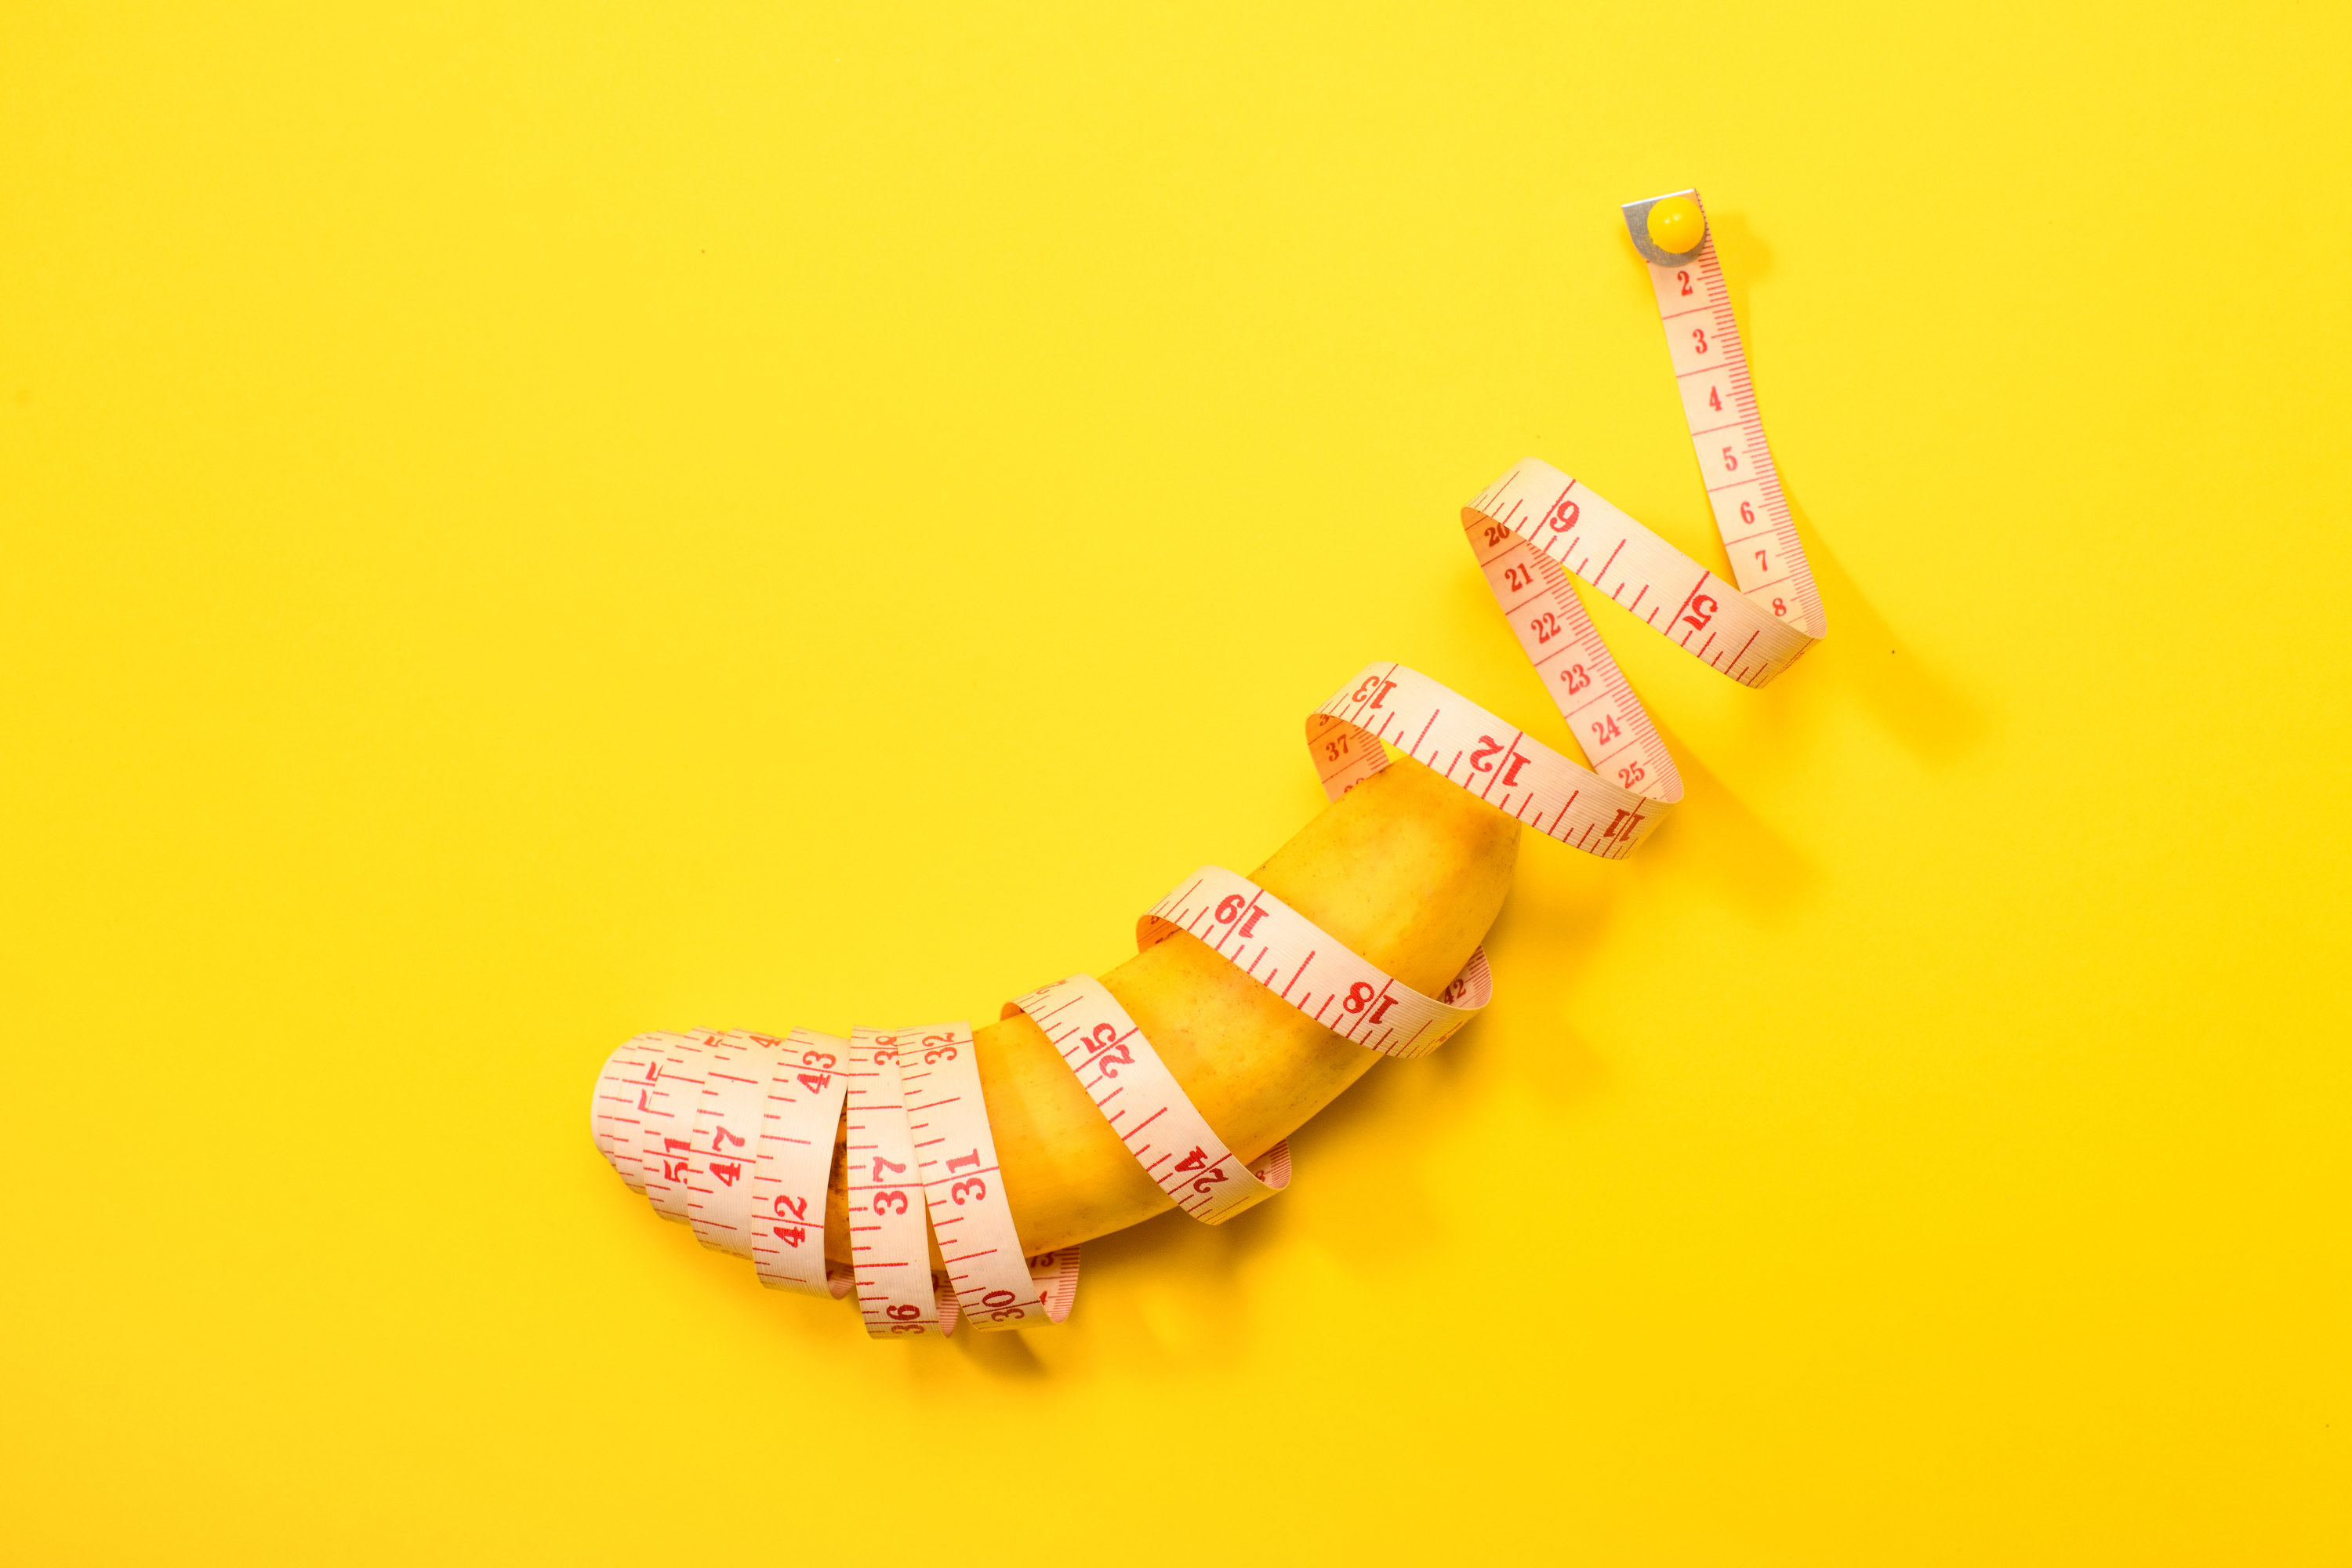 A banana wrapped in measuring tape on a yellow background